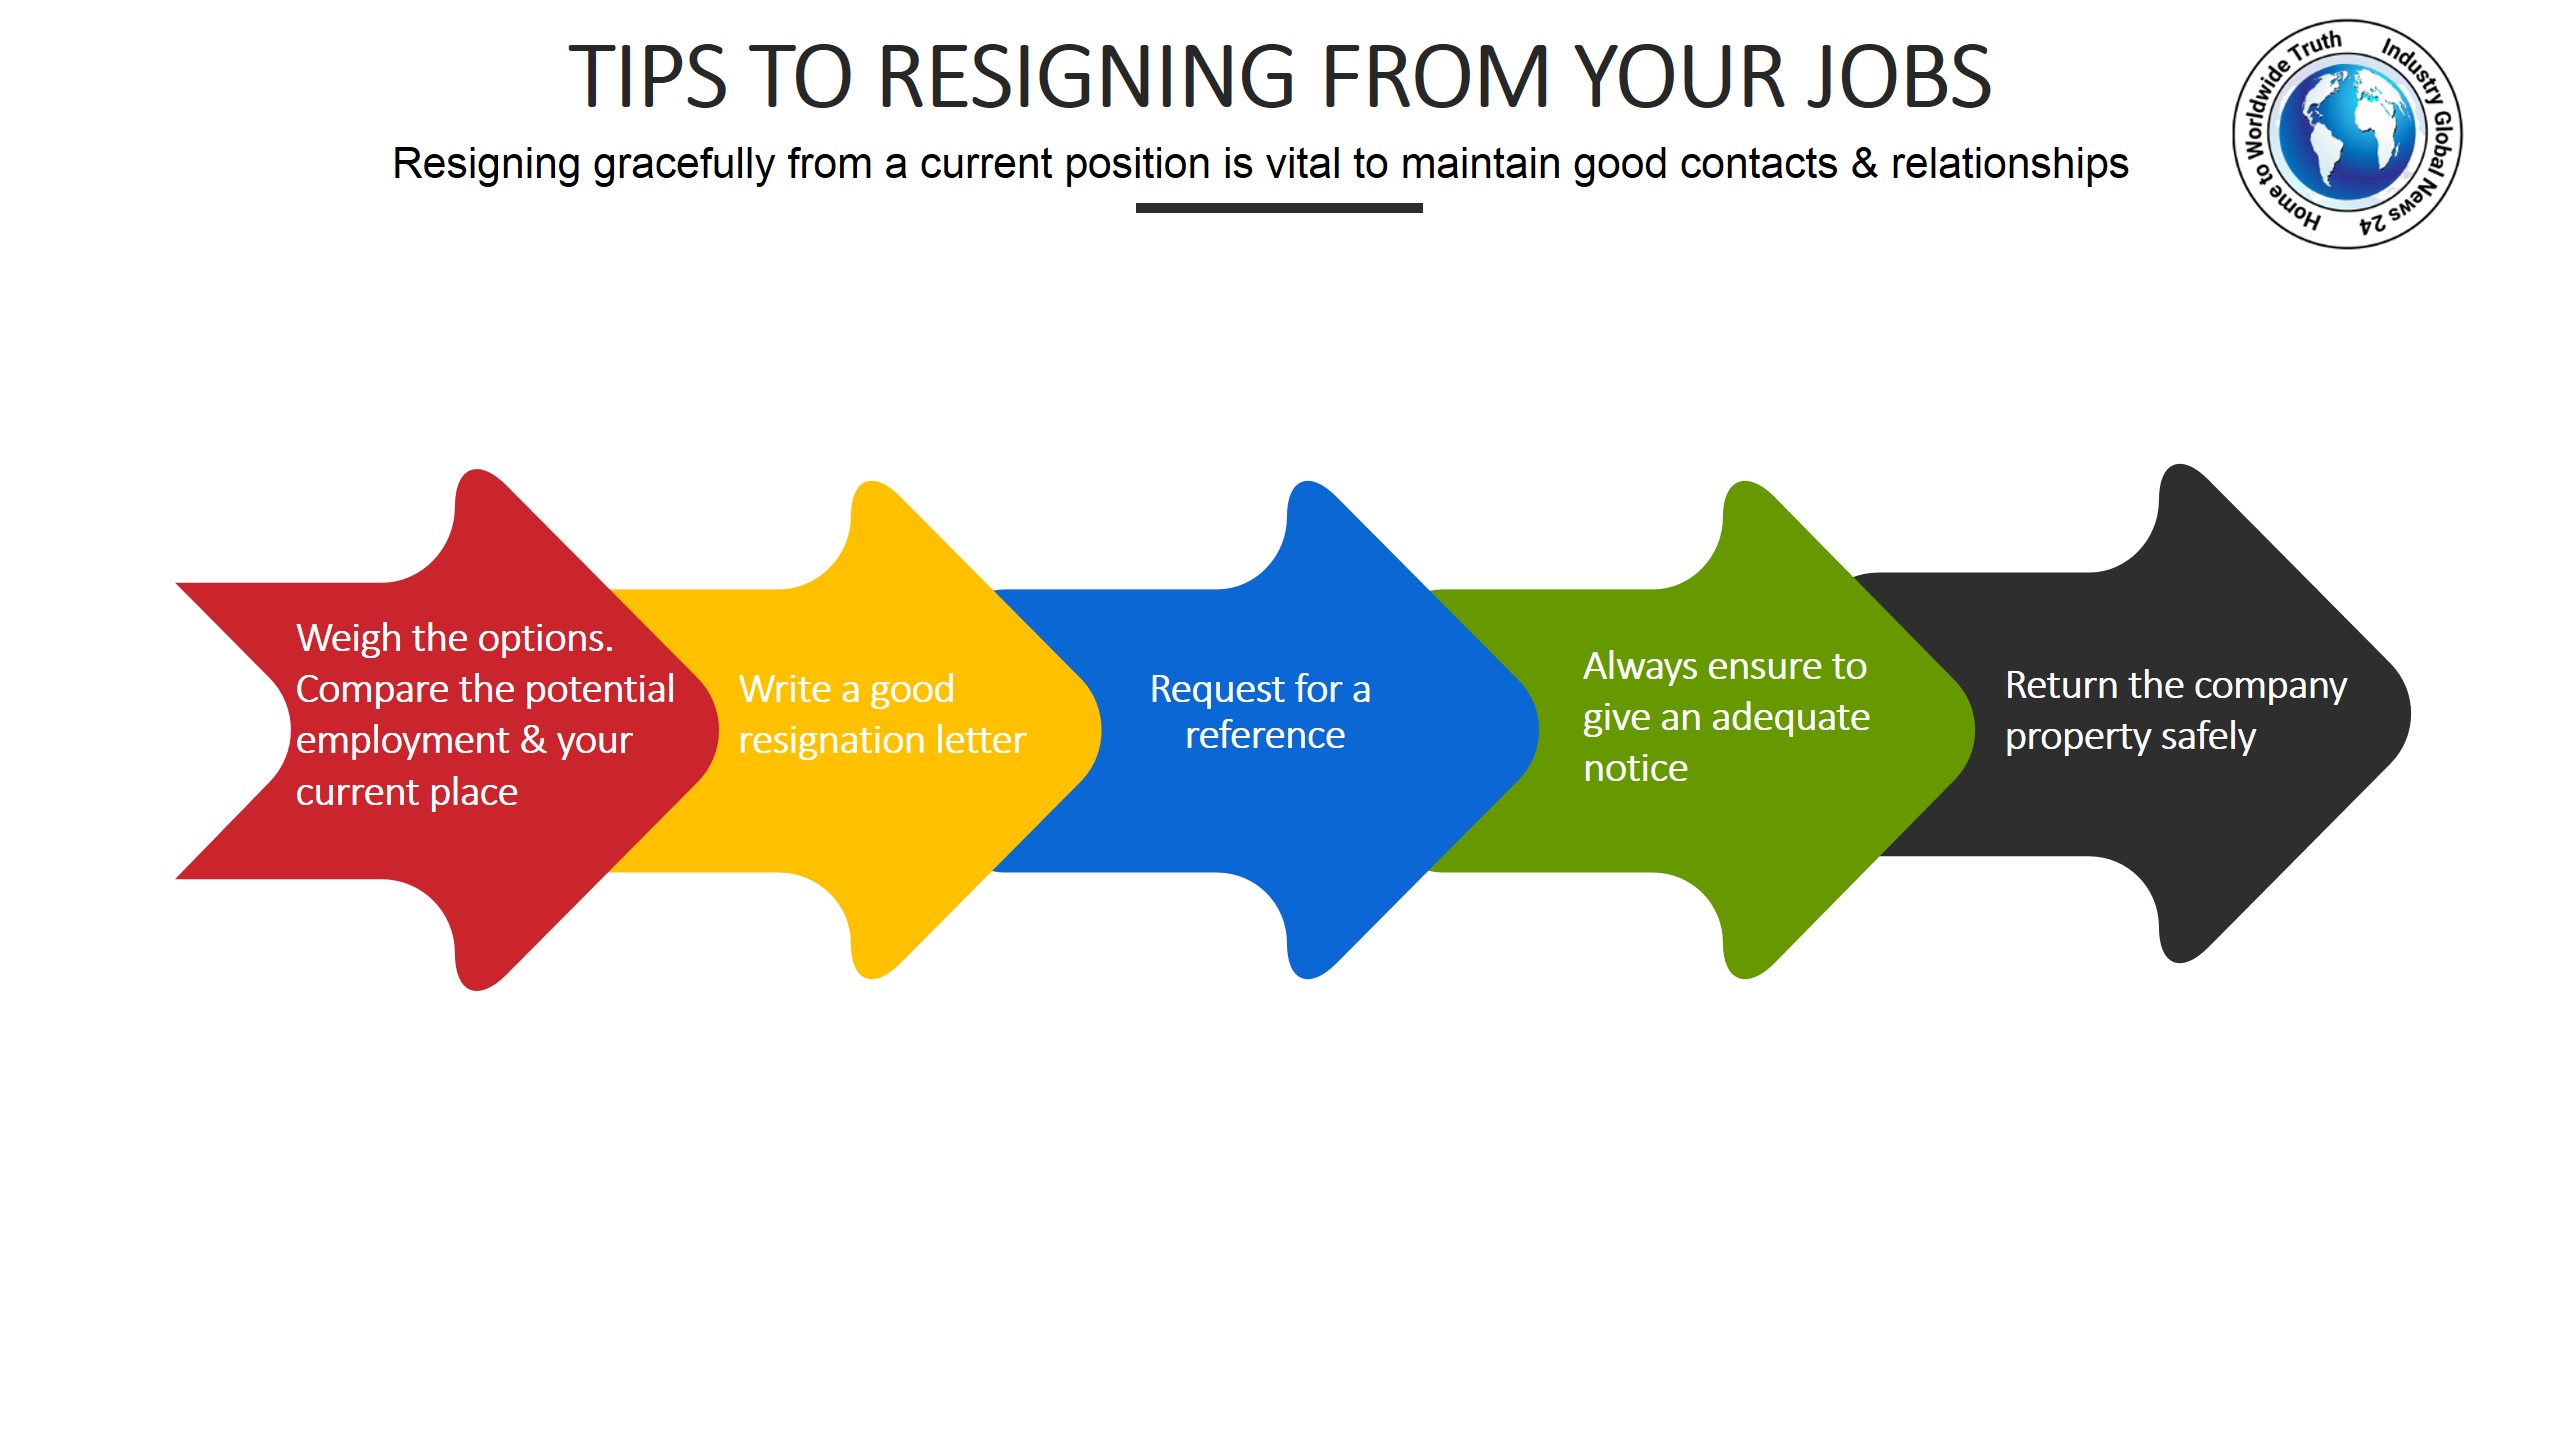 Tips to resigning from your jobs